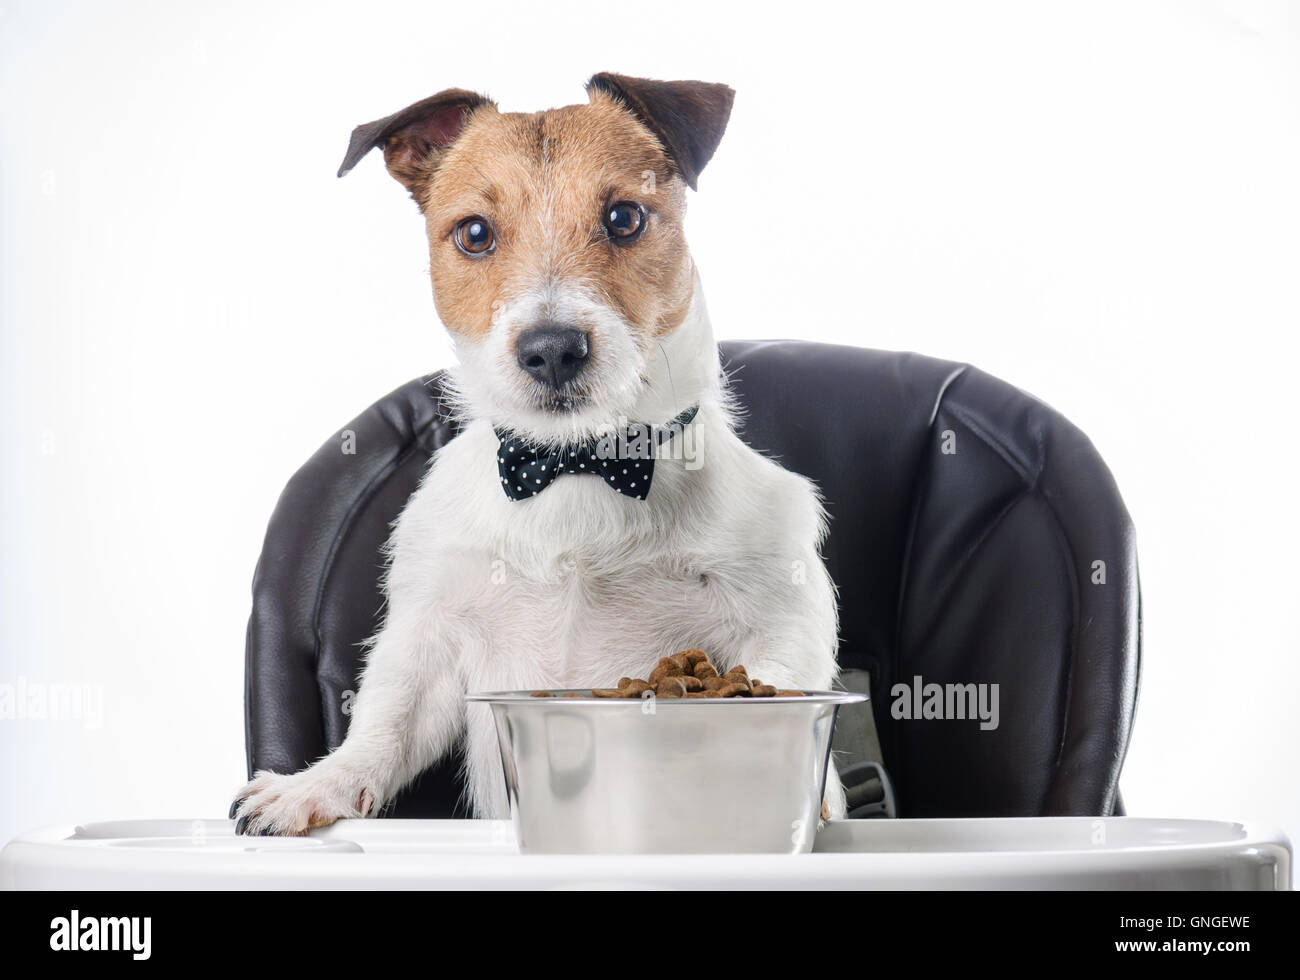 Dog with bow tie eating food from bowl Stock Photo